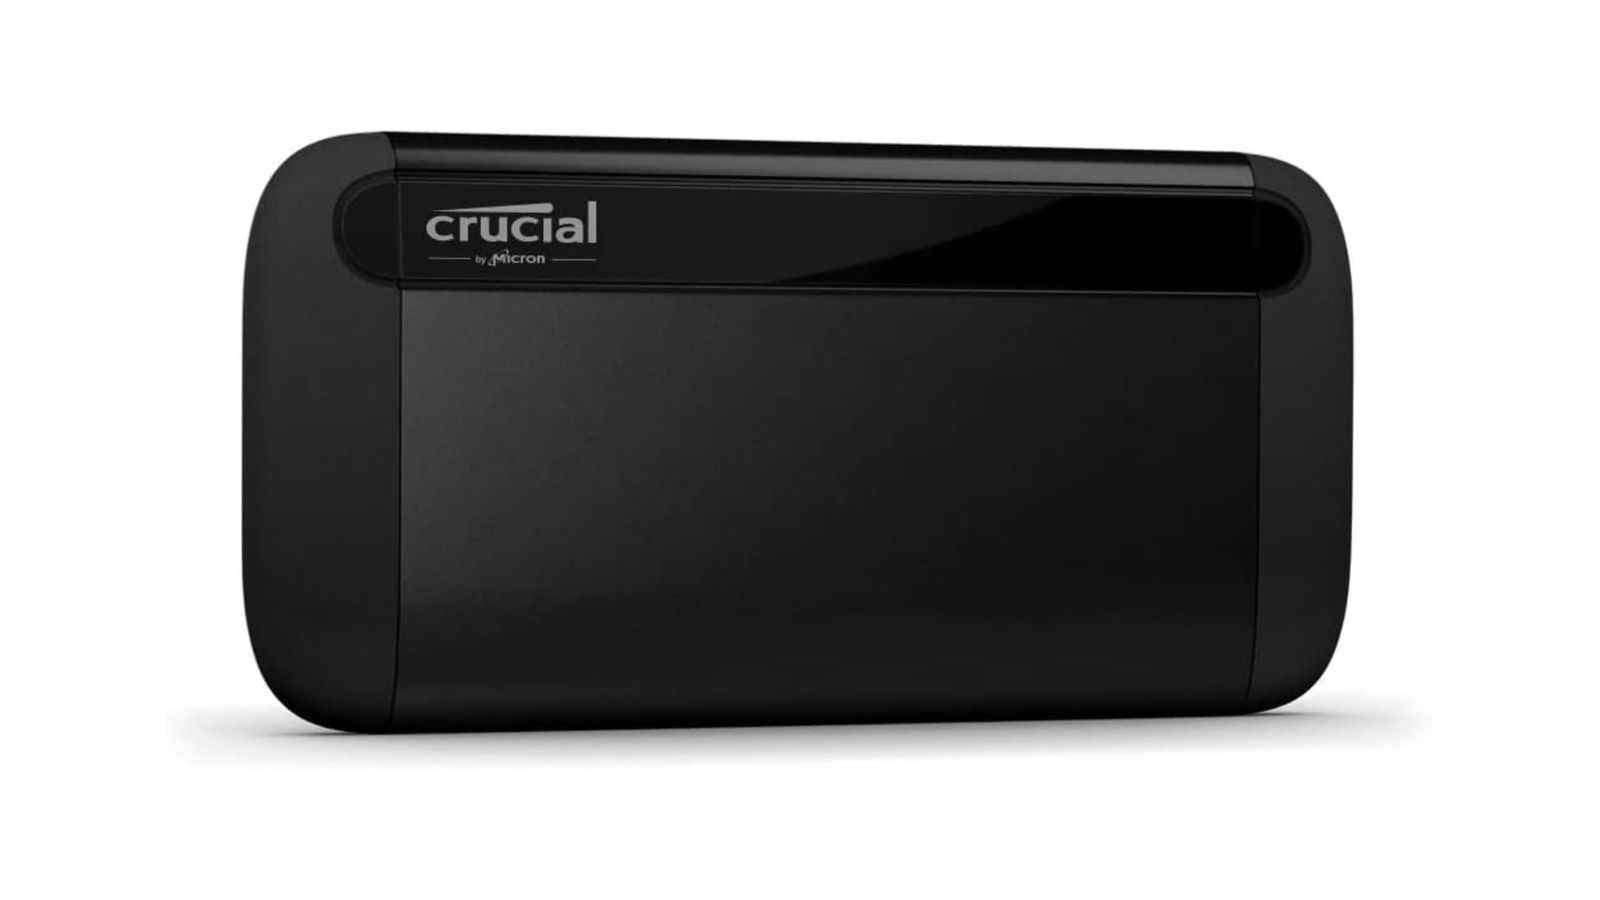 Crucial X8 product image of a rectangular, black hard drive featuring grey Crucial branding in the corner.